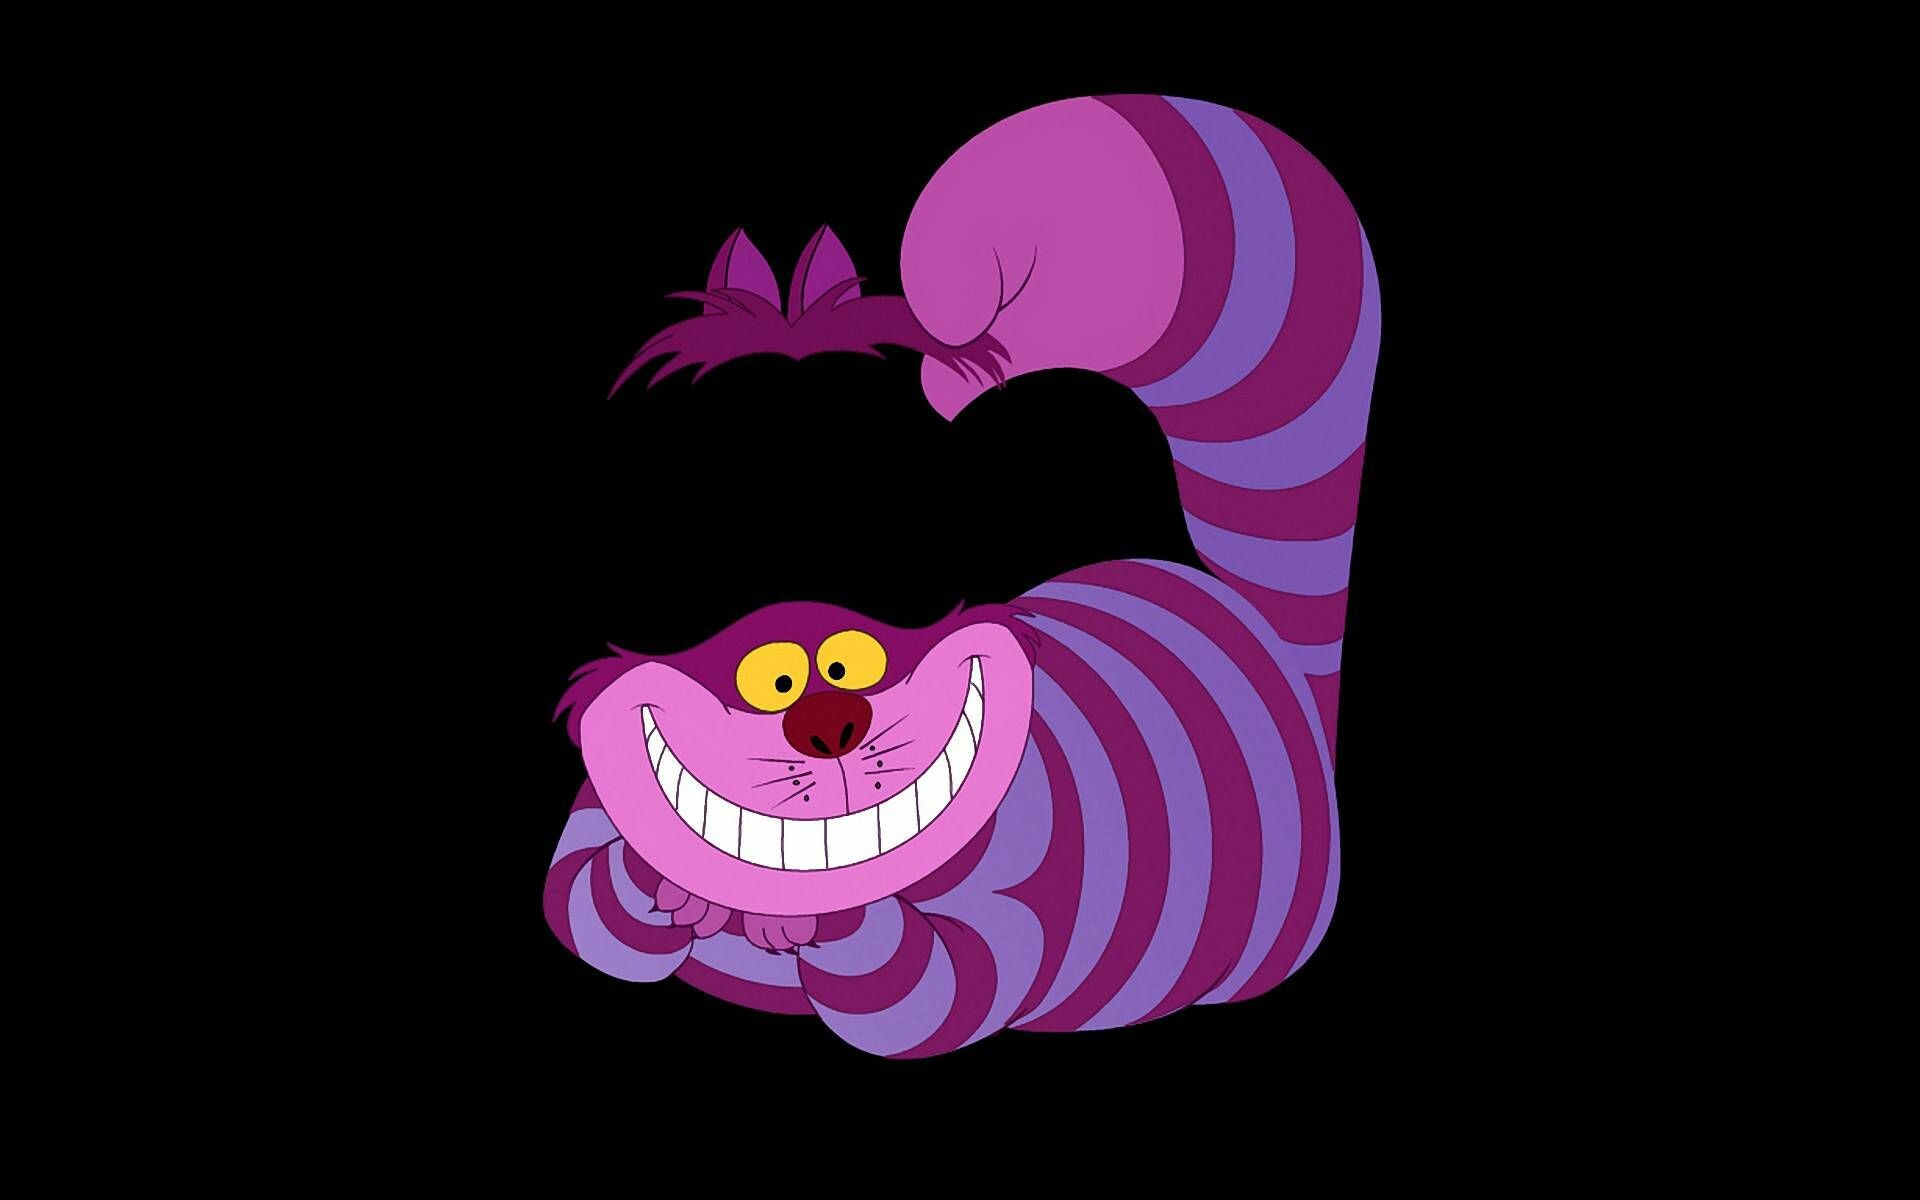 Alice In Wonderland (Cartoon): Cheshire cat, Fictional character, Voiced by Sterling Holloway. 1920x1200 HD Wallpaper.